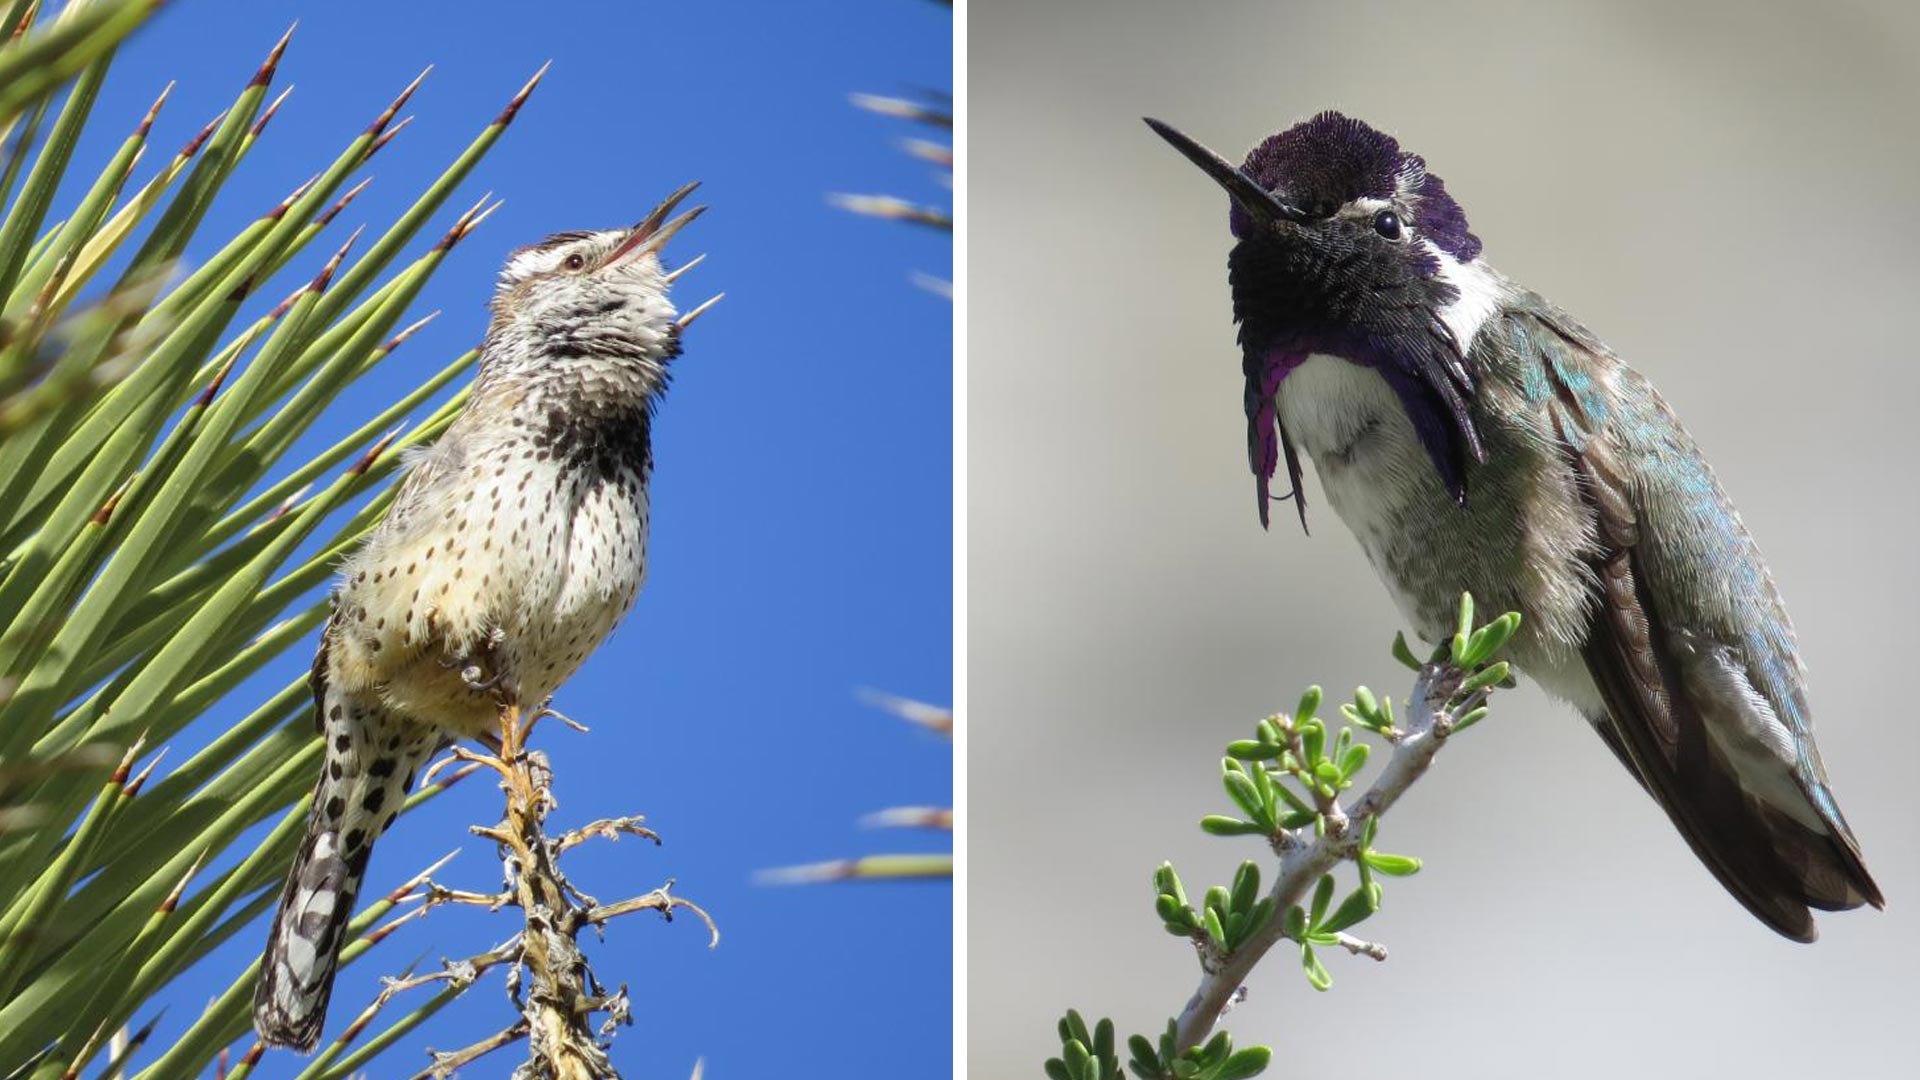 Desert-adapted birds like the cactus wren, at left, have declined throughout the Mojave Desert, but not as much as other birds. Decreased rainfall because of climate change appears to be the culprit. On the right, a Costa's hummingbird.